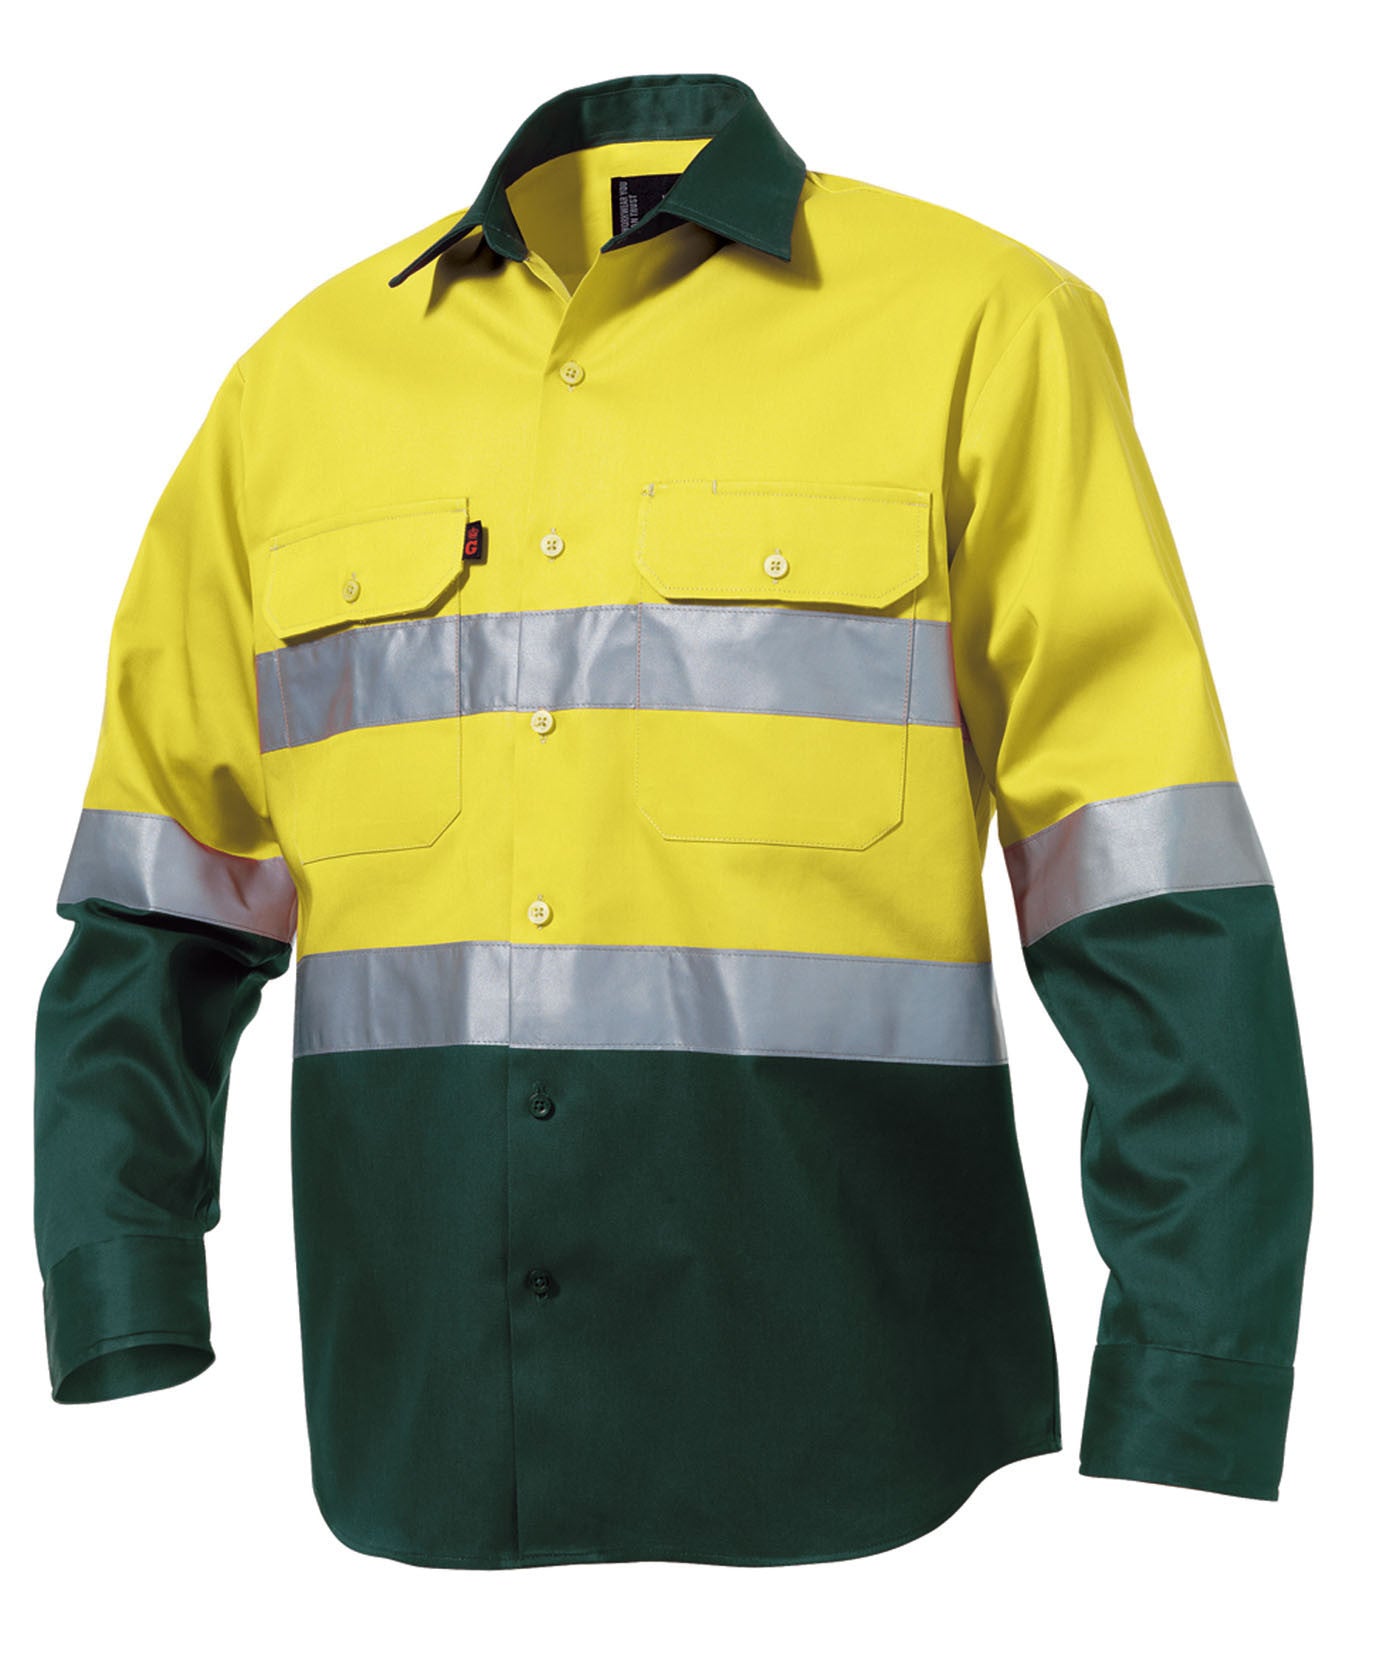 King Gee-King Gee L/s Hi-vis Open Front Spliced Reflect Shirt with Hi Vis Tape-Yellow/Green / S-Uniform Wholesalers - 2